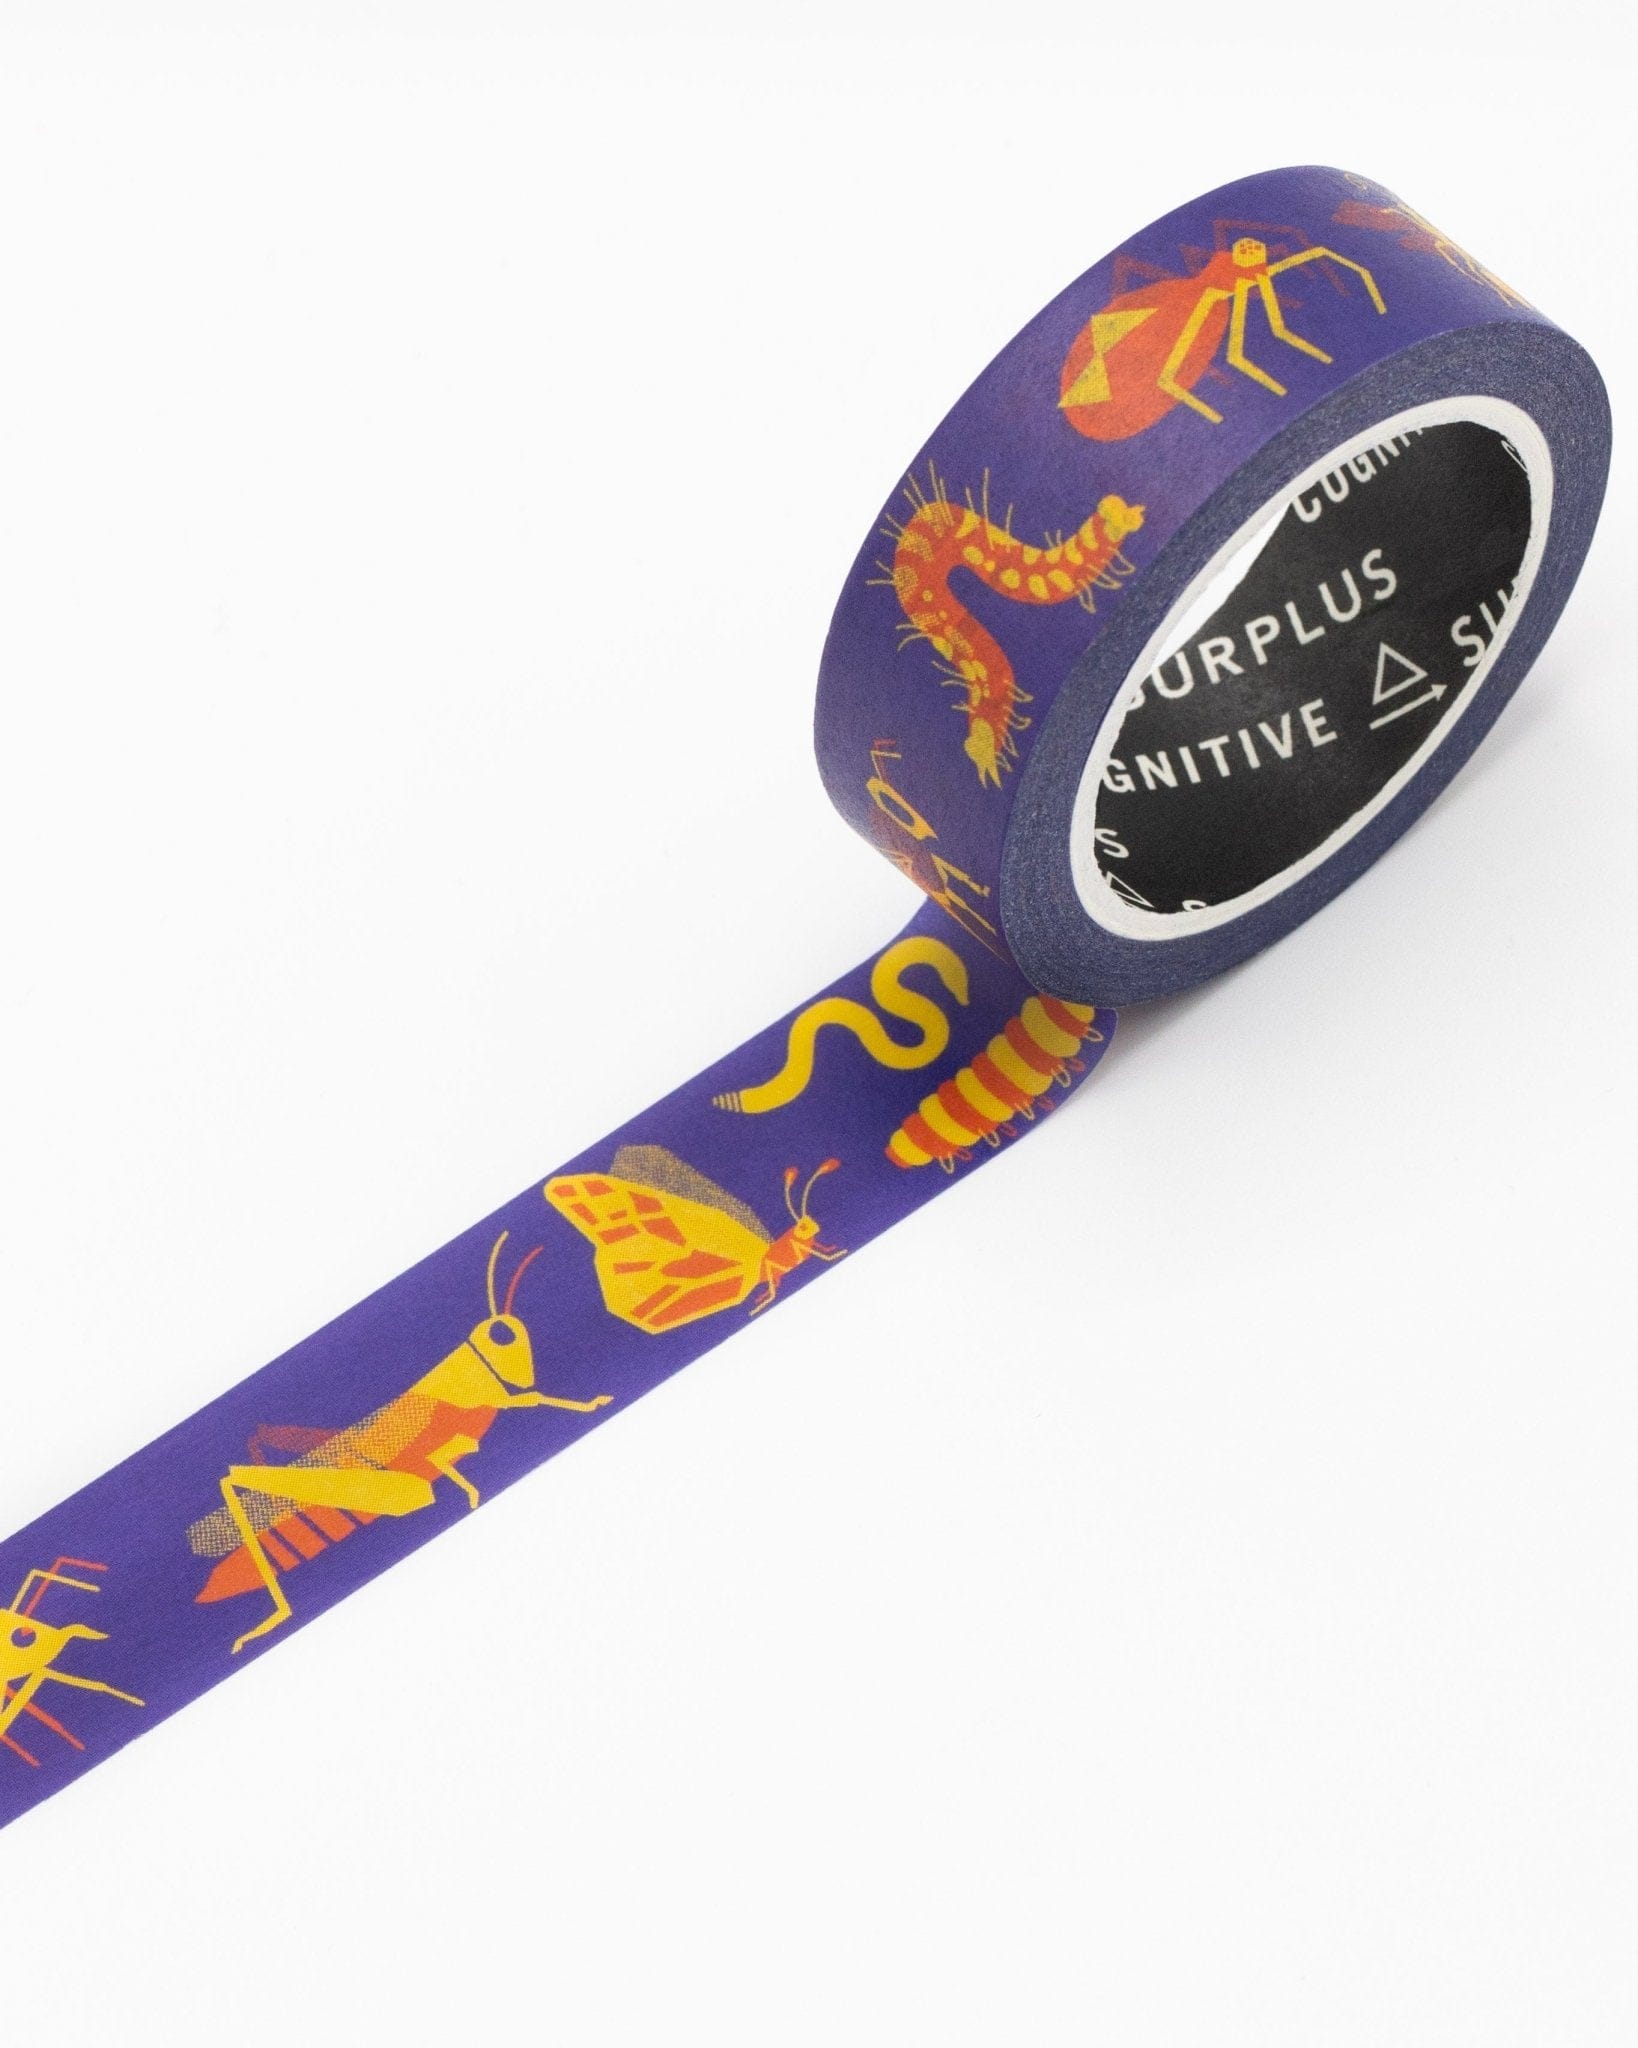 MT Washi Tape - Kids Insect / Hedgerow General